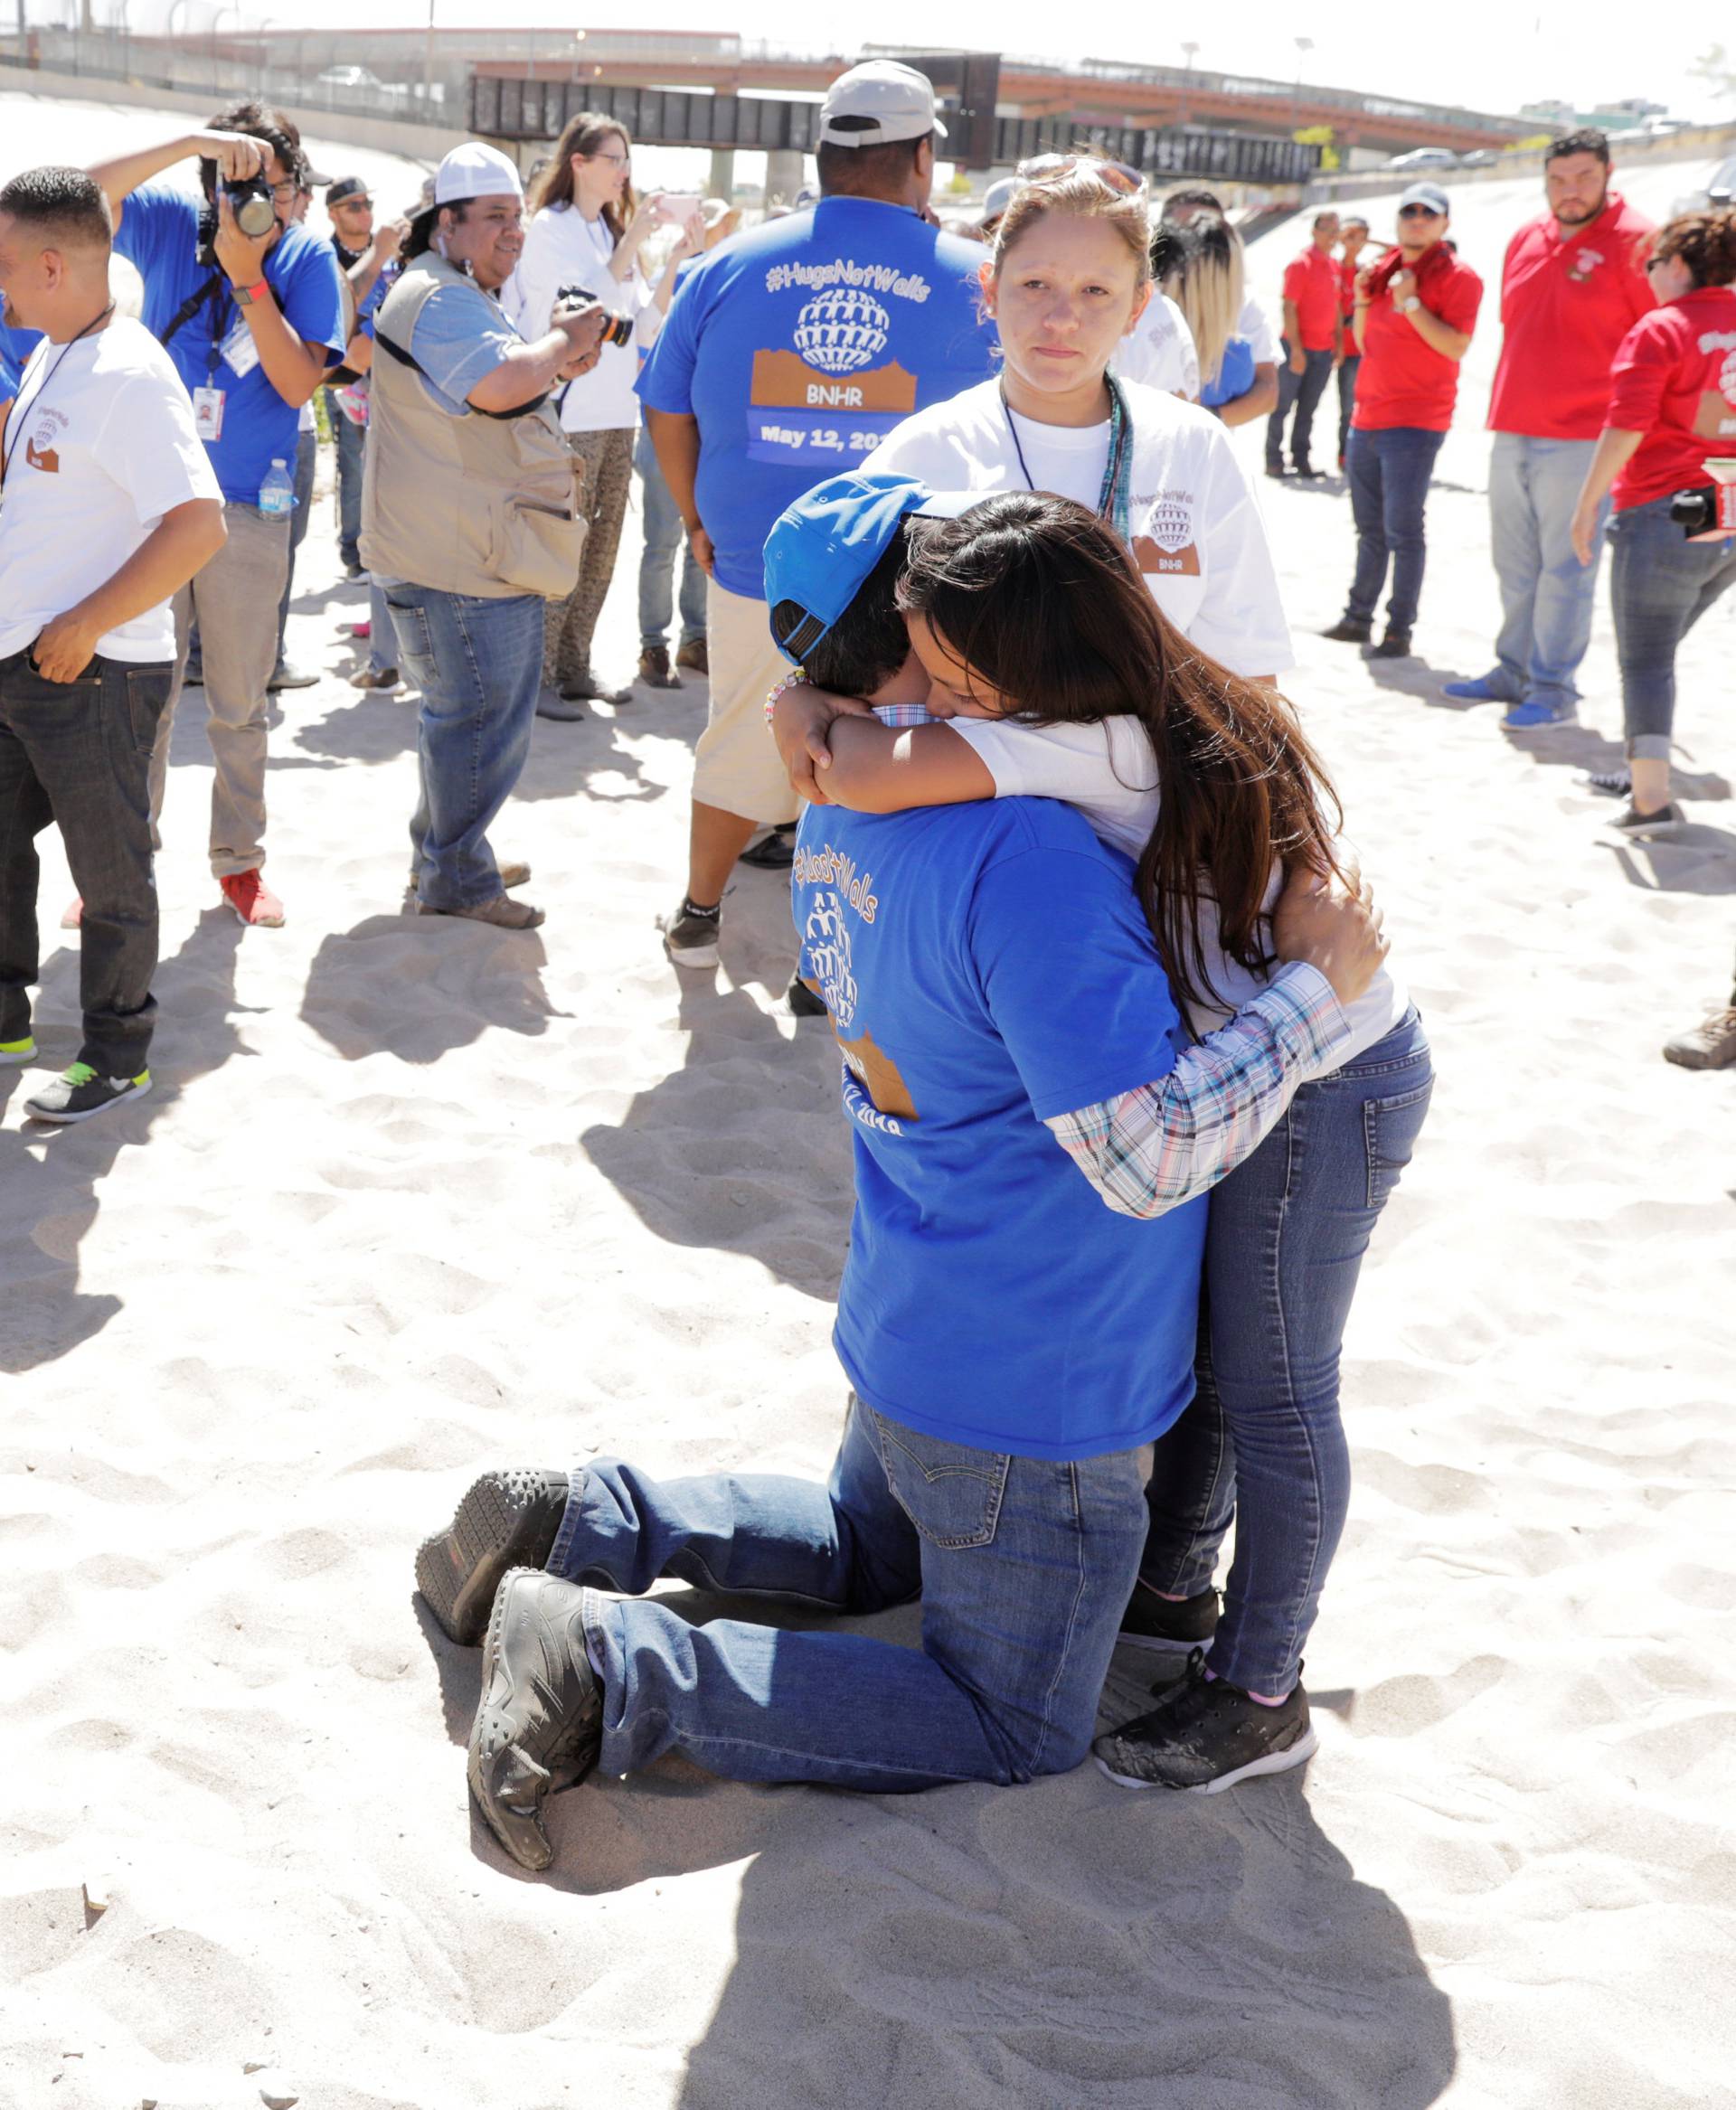 Family members from the United States (in blue) and Mexico (in white) greet each other for three minutes during the "Hugs not Walls" event in a riverbed of the Rio Grande on the border of Juarez, Mexico, and El Paso, Texas